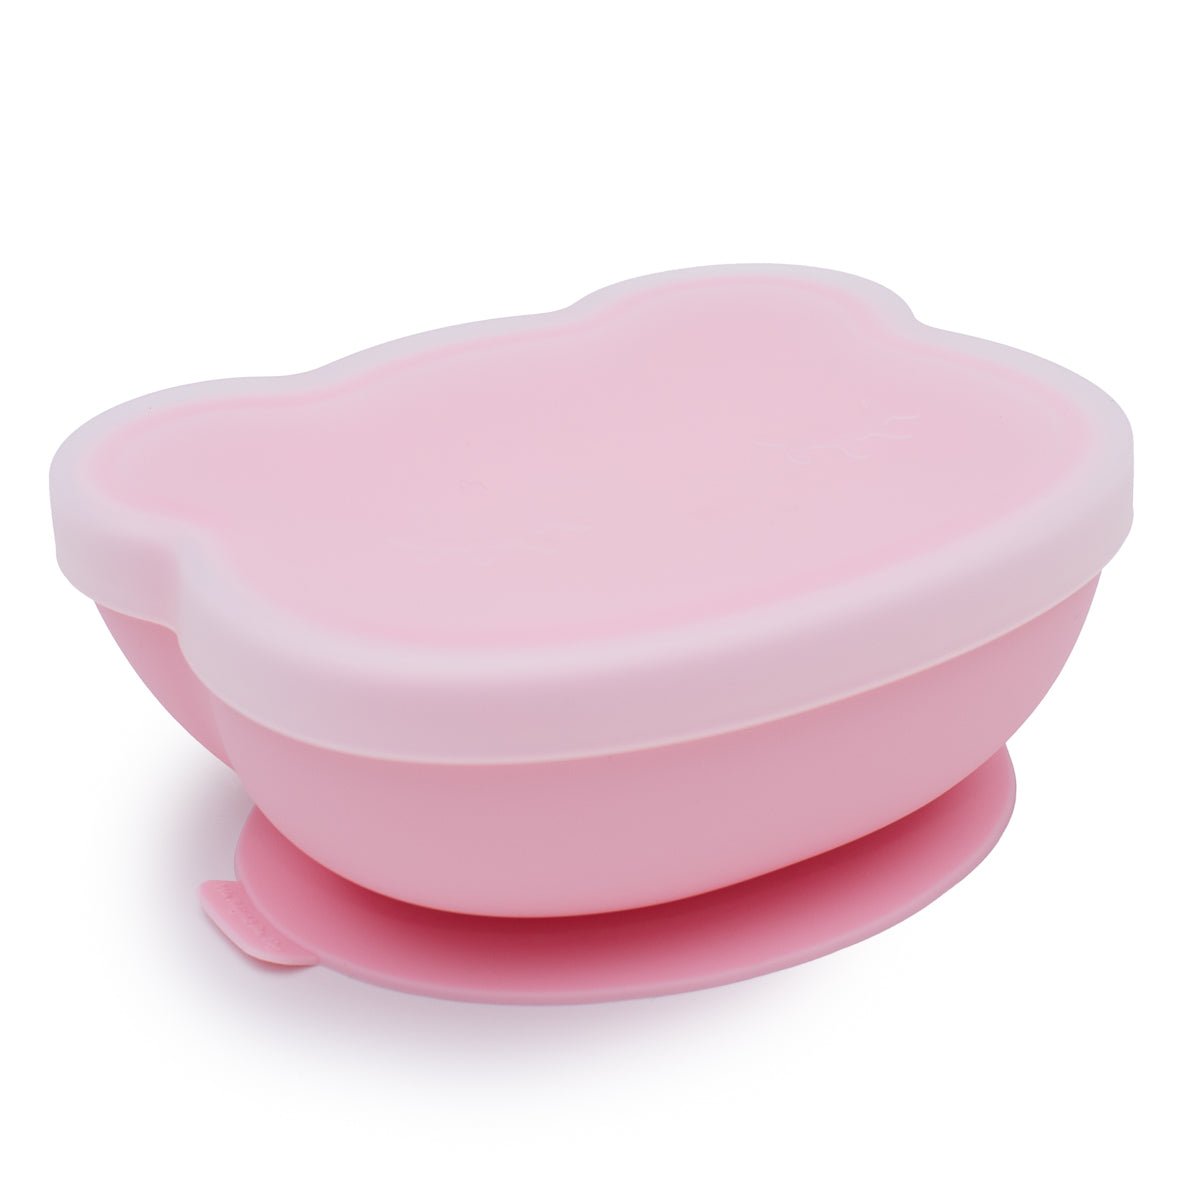 Microwave Safe Silicone Suction Bowl by We Might Be Tiny